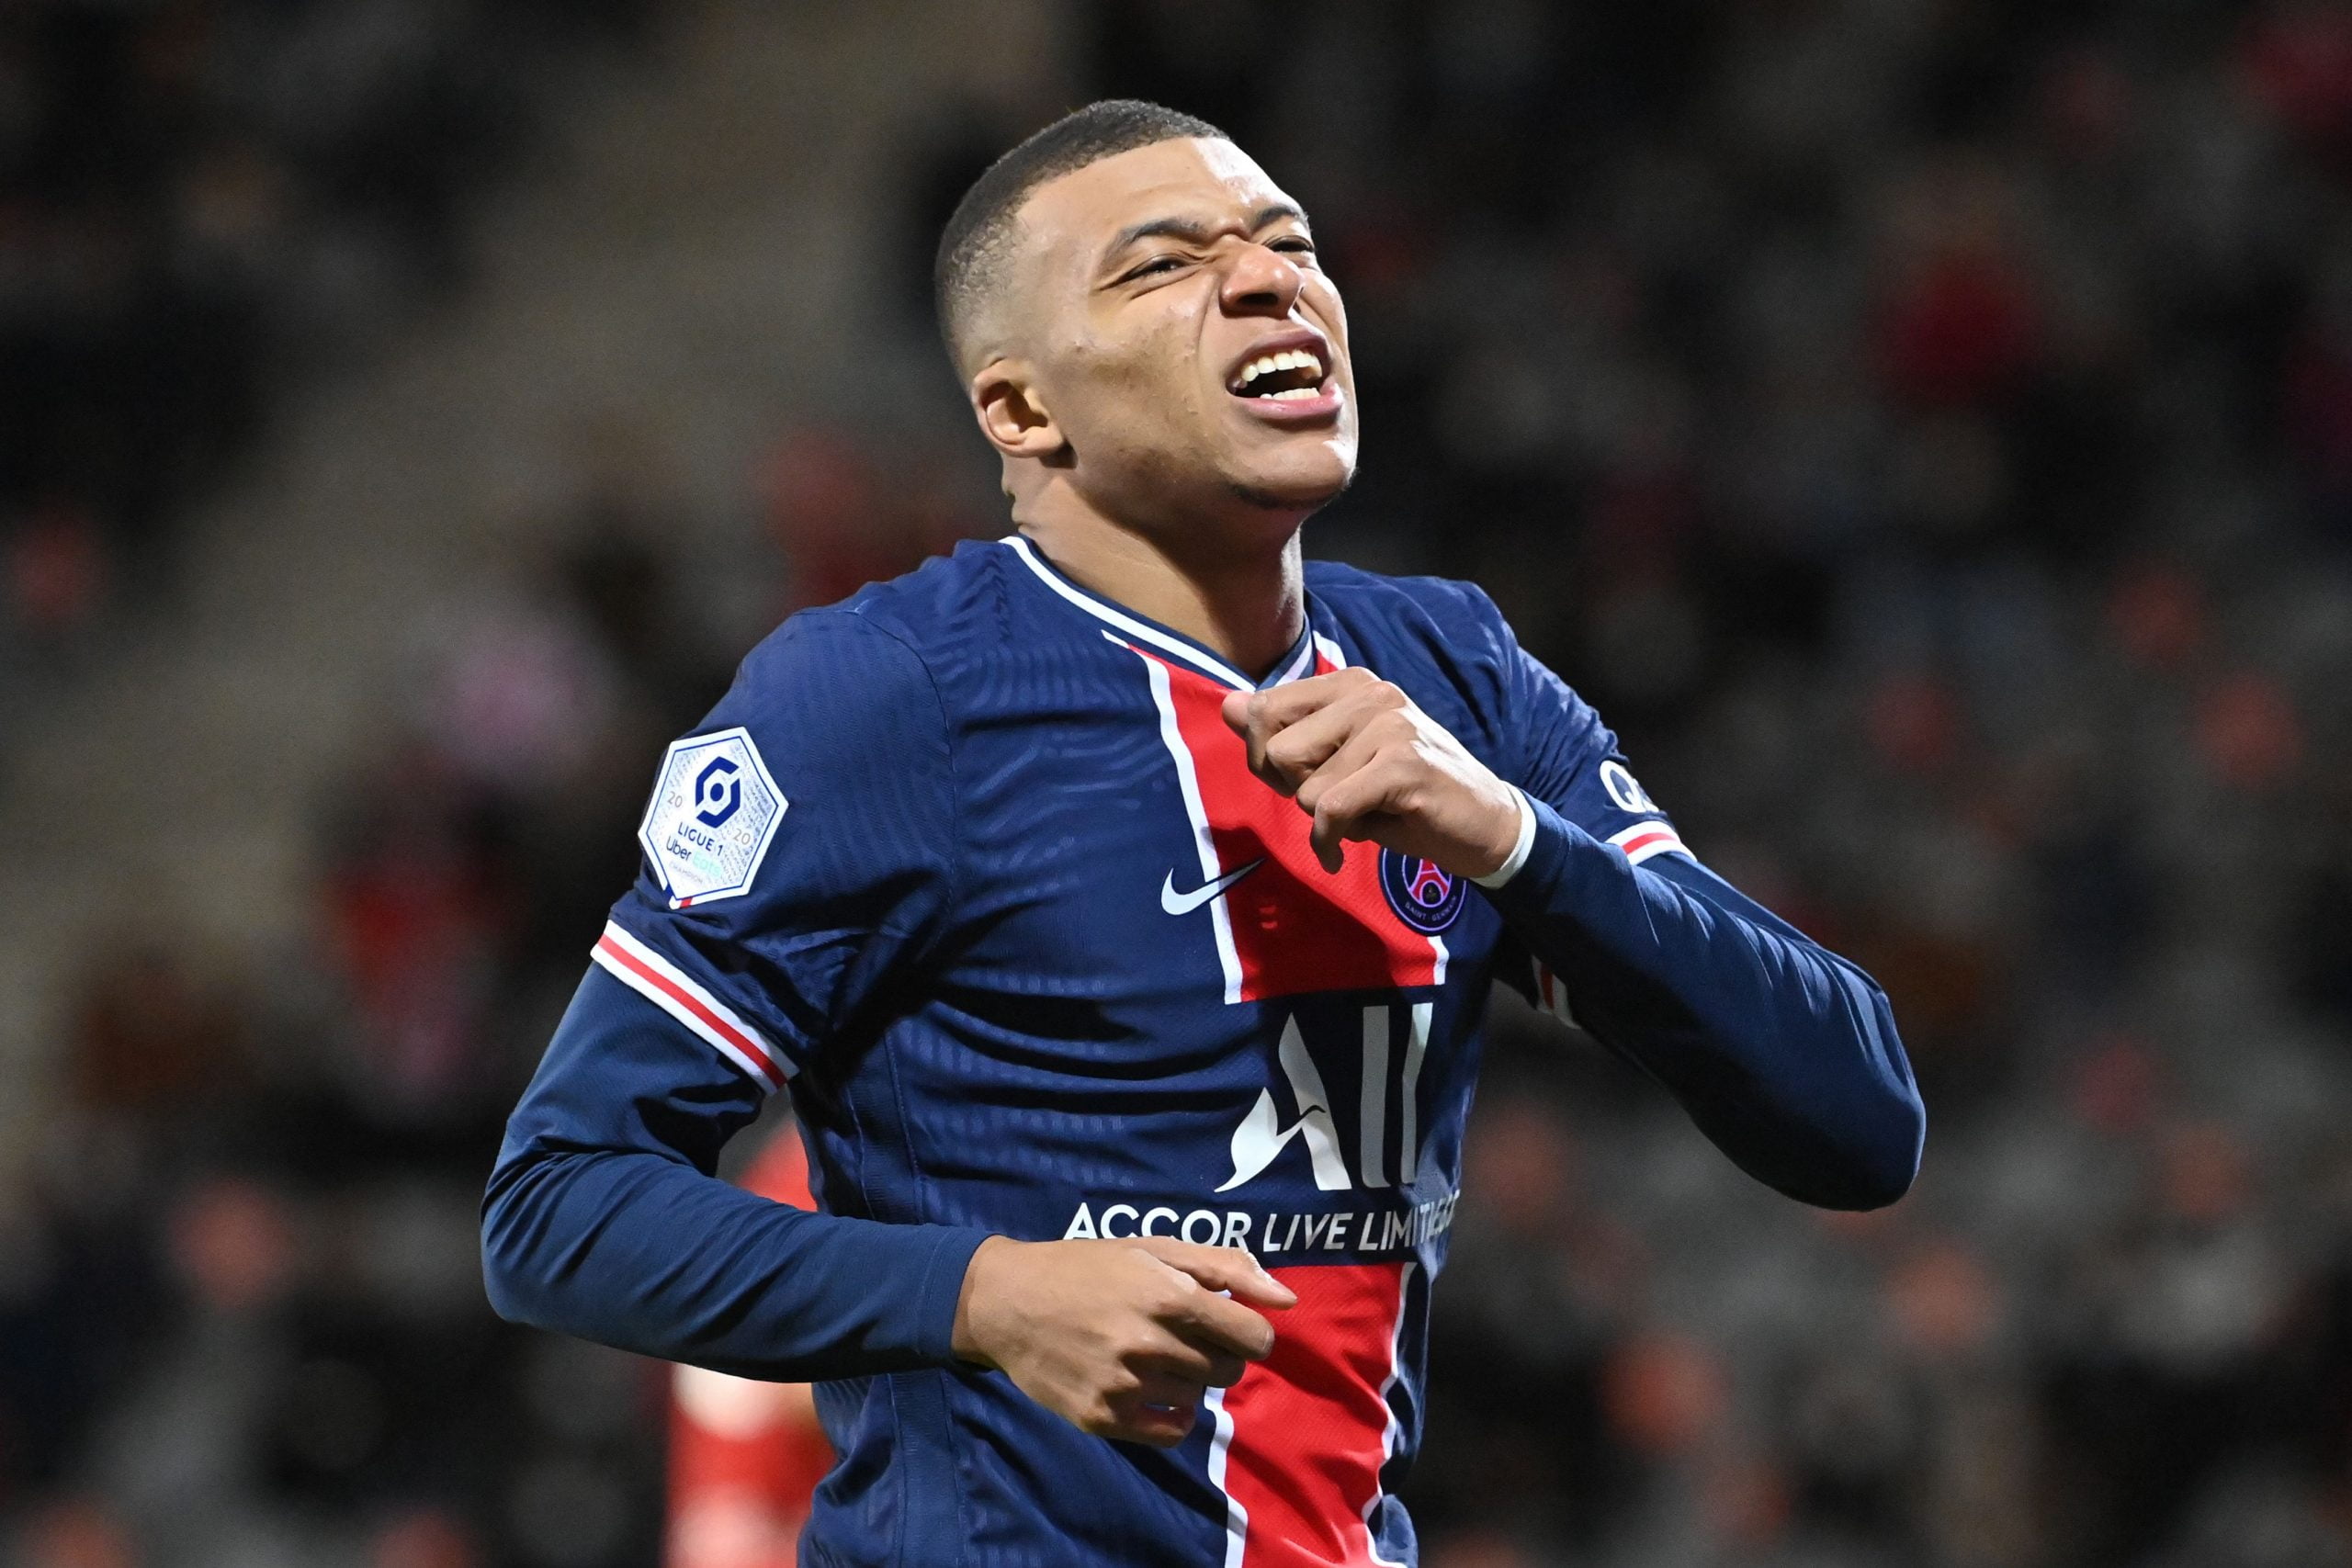 Journalist claims Mbappe is keen to play for Liverpool (Mbappe is seen in the picture)